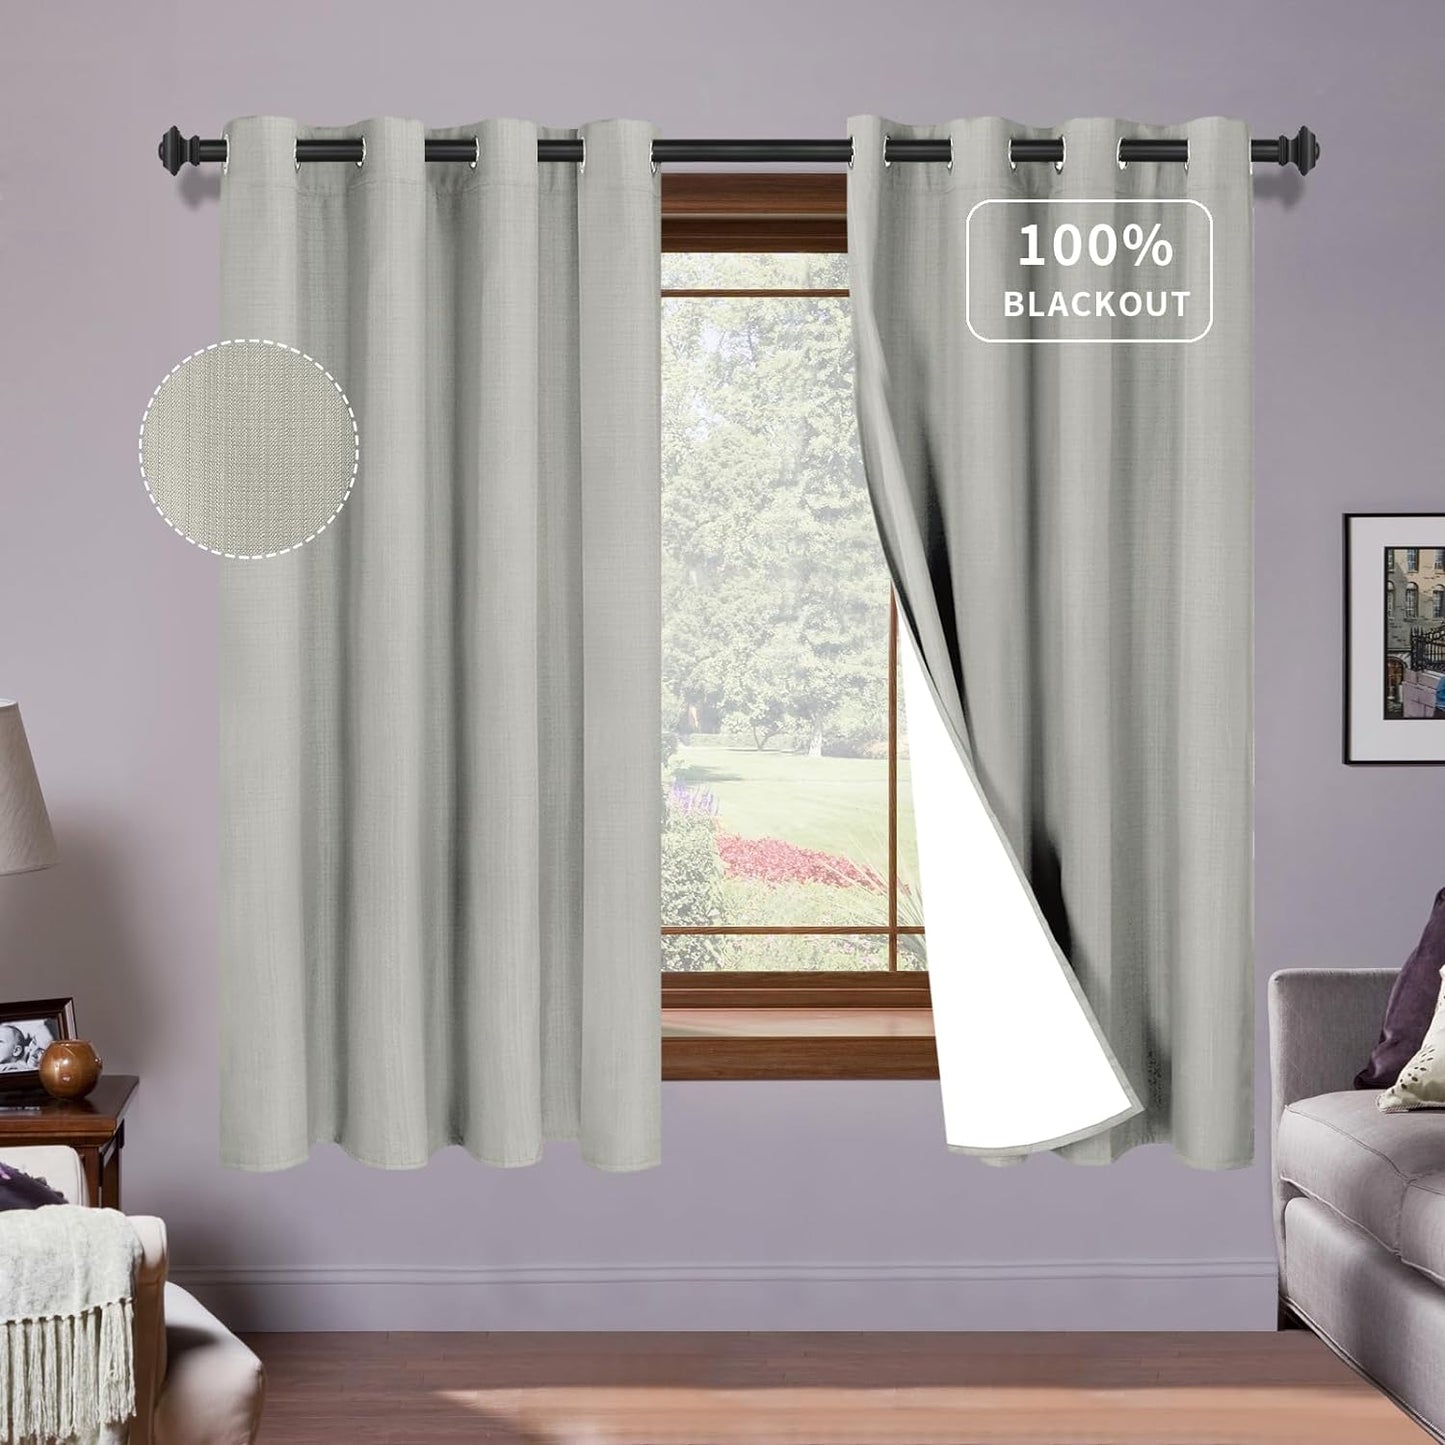 Purefit White Linen Blackout Curtains 84 Inches Long 100% Room Darkening Thermal Insulated Window Curtain Drapes for Bedroom Living Room Nursery with Anti-Rust Grommets & Energy Saving Liner, 2 Panels  PureFit Light Grey 52"W X 63"L 